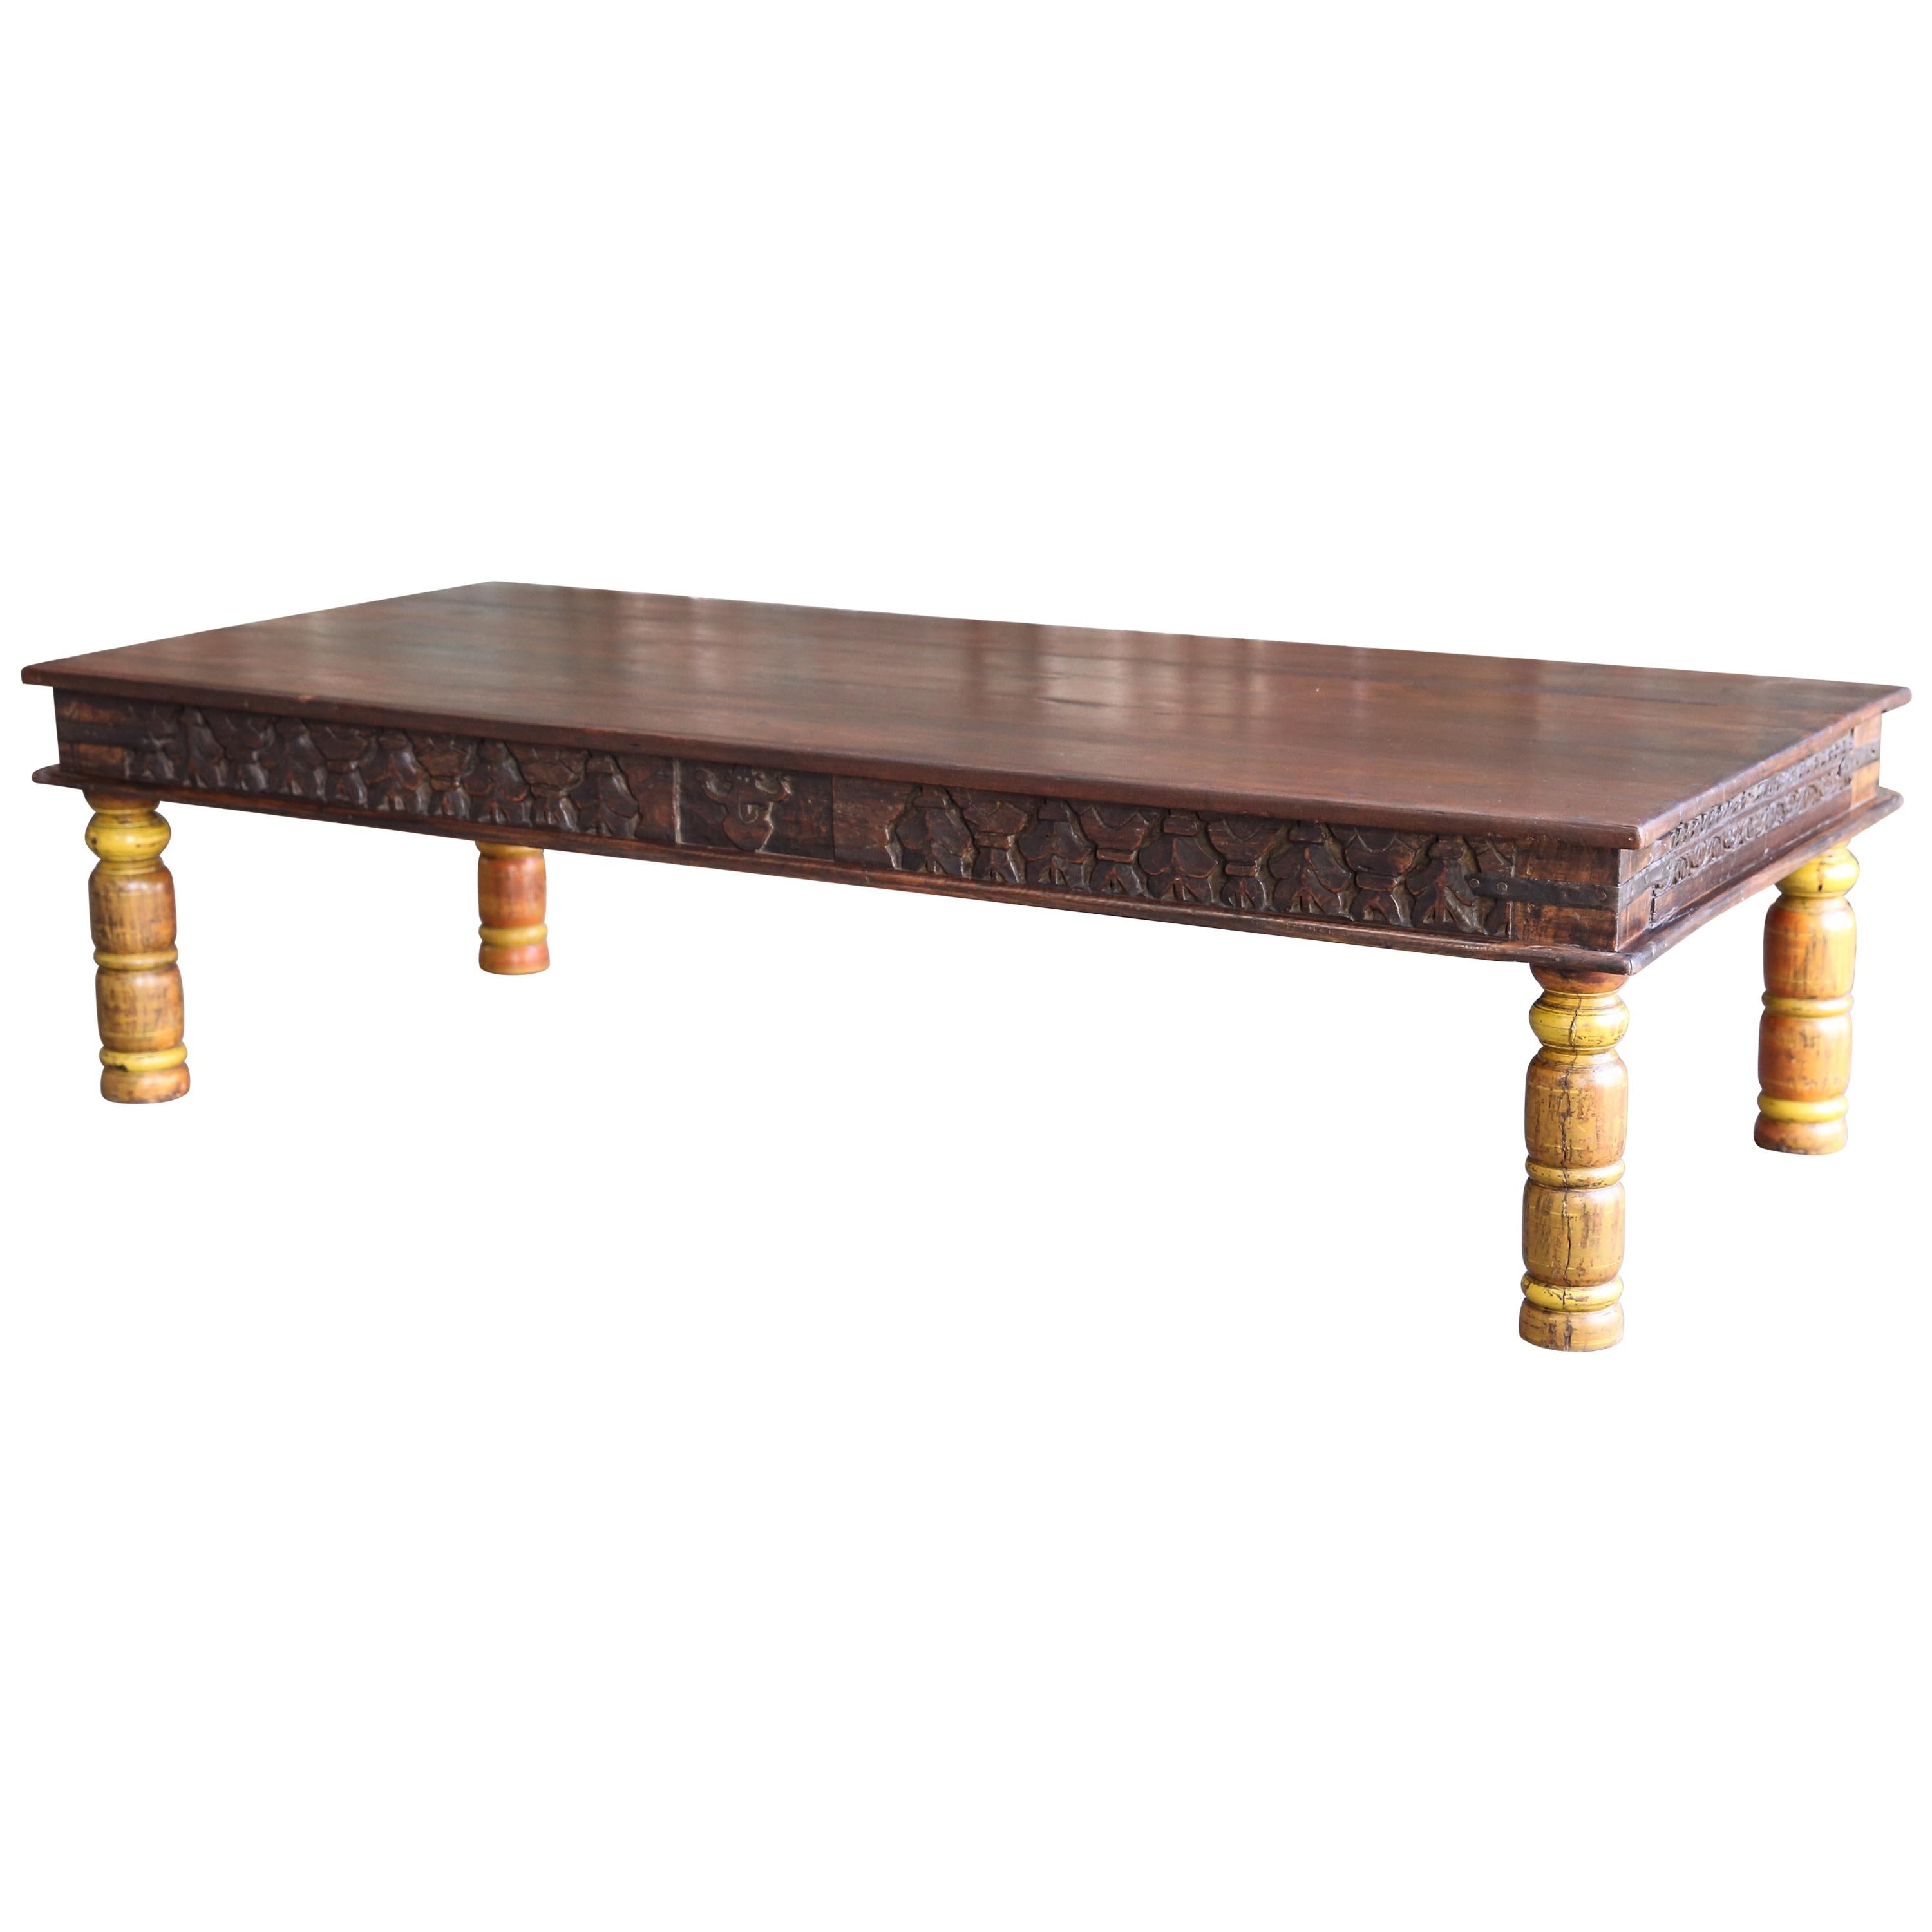 19th Century Idealistic Solid Teak Wood Coffee Table from a Tea Plantation For Sale